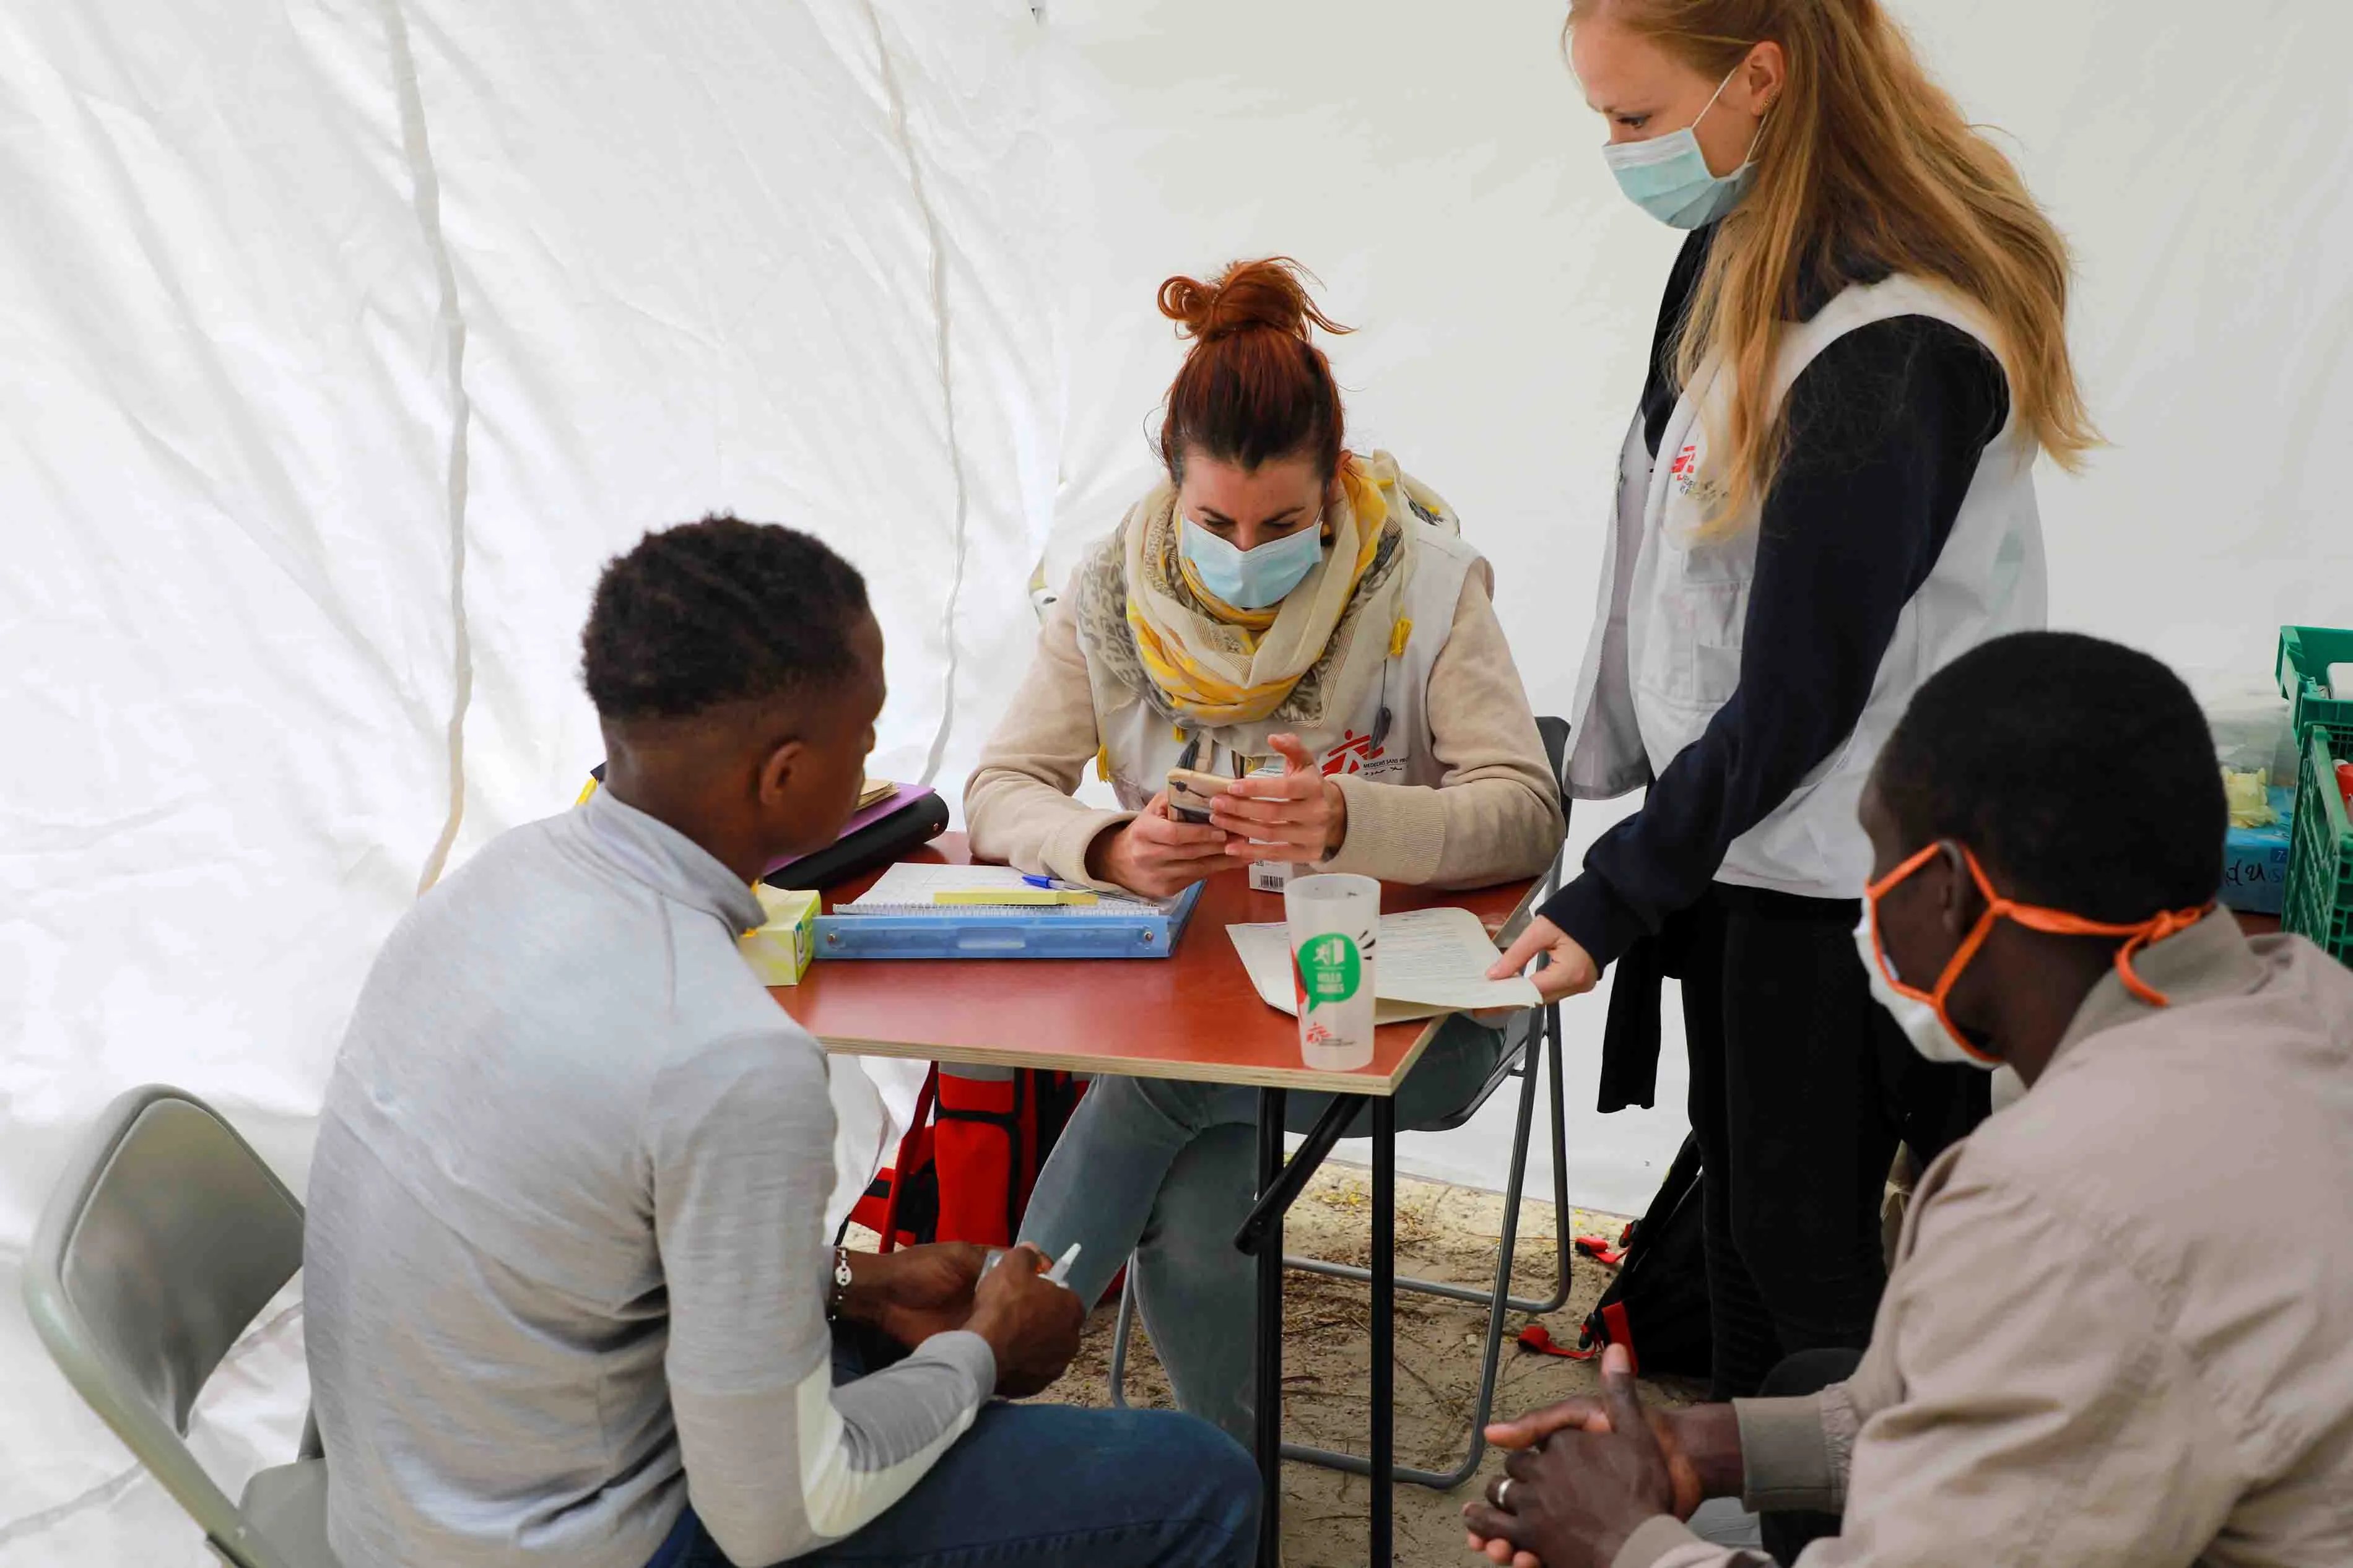 MSF nurses giving free consultations to unaccompanied foreign minors in the Paris camp. 2020.